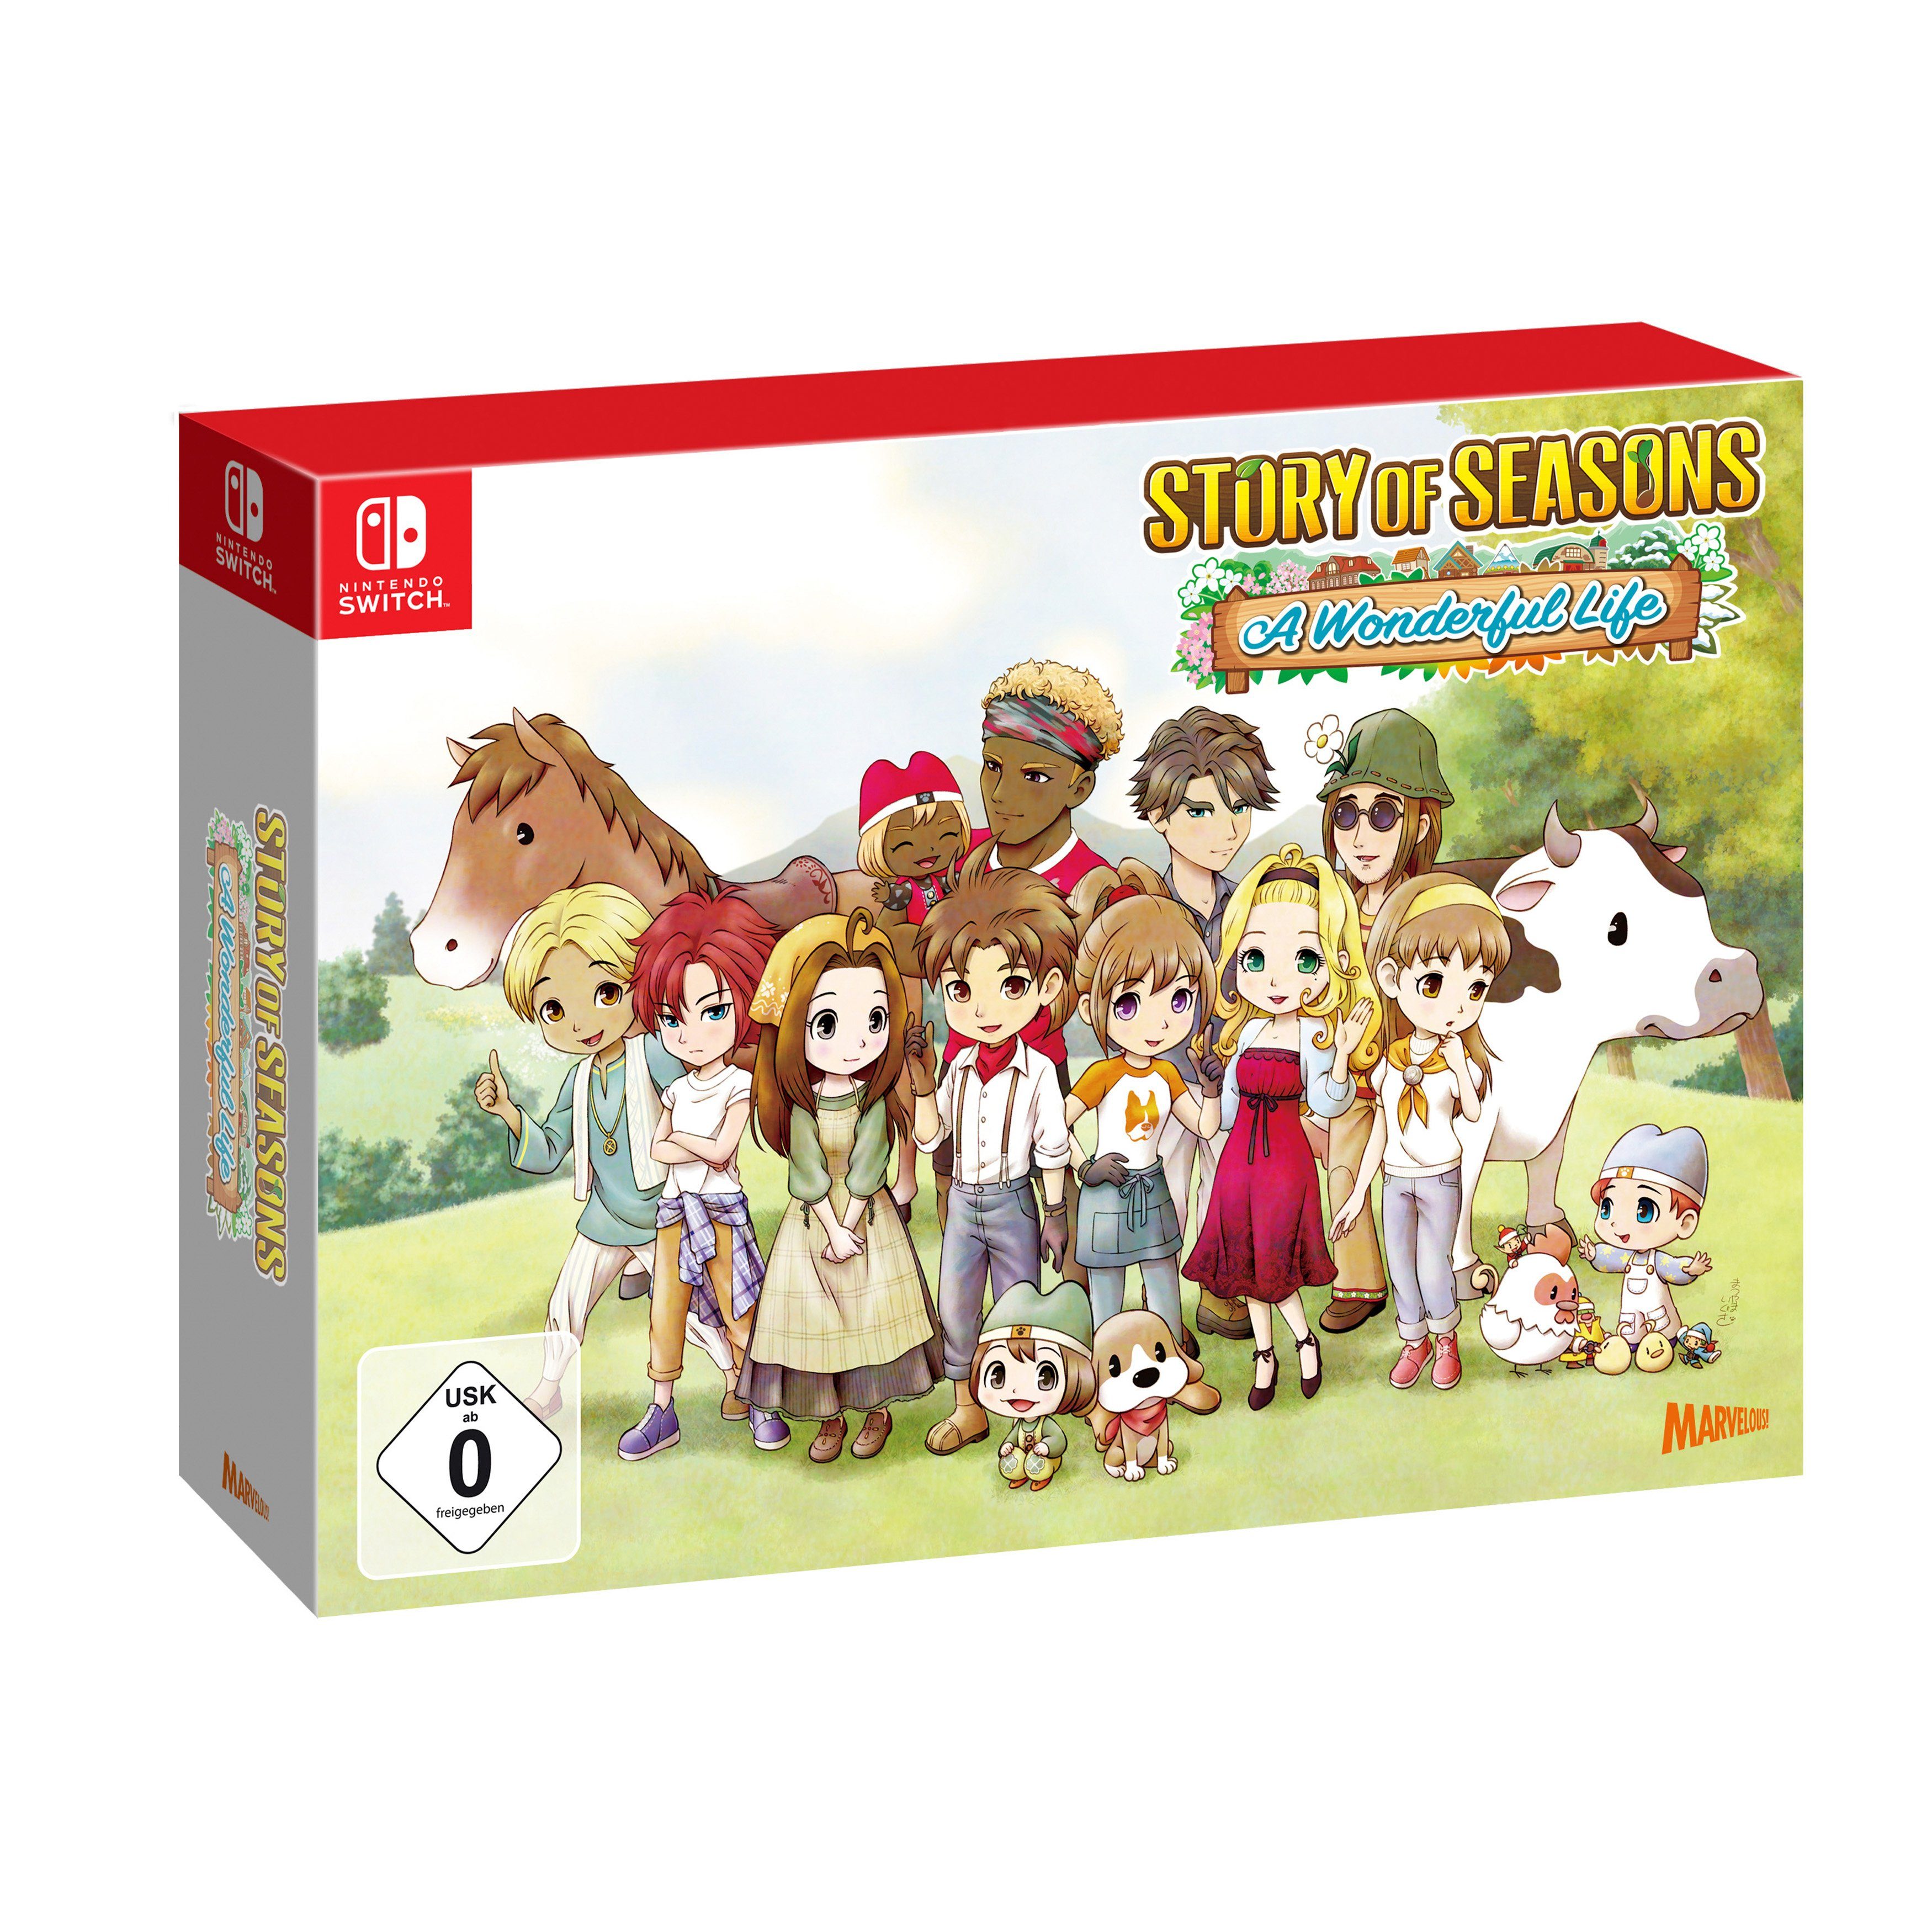 Story of Seasons: A Wonderful Switch, Edition Edition Life Limited Limited Nintendo